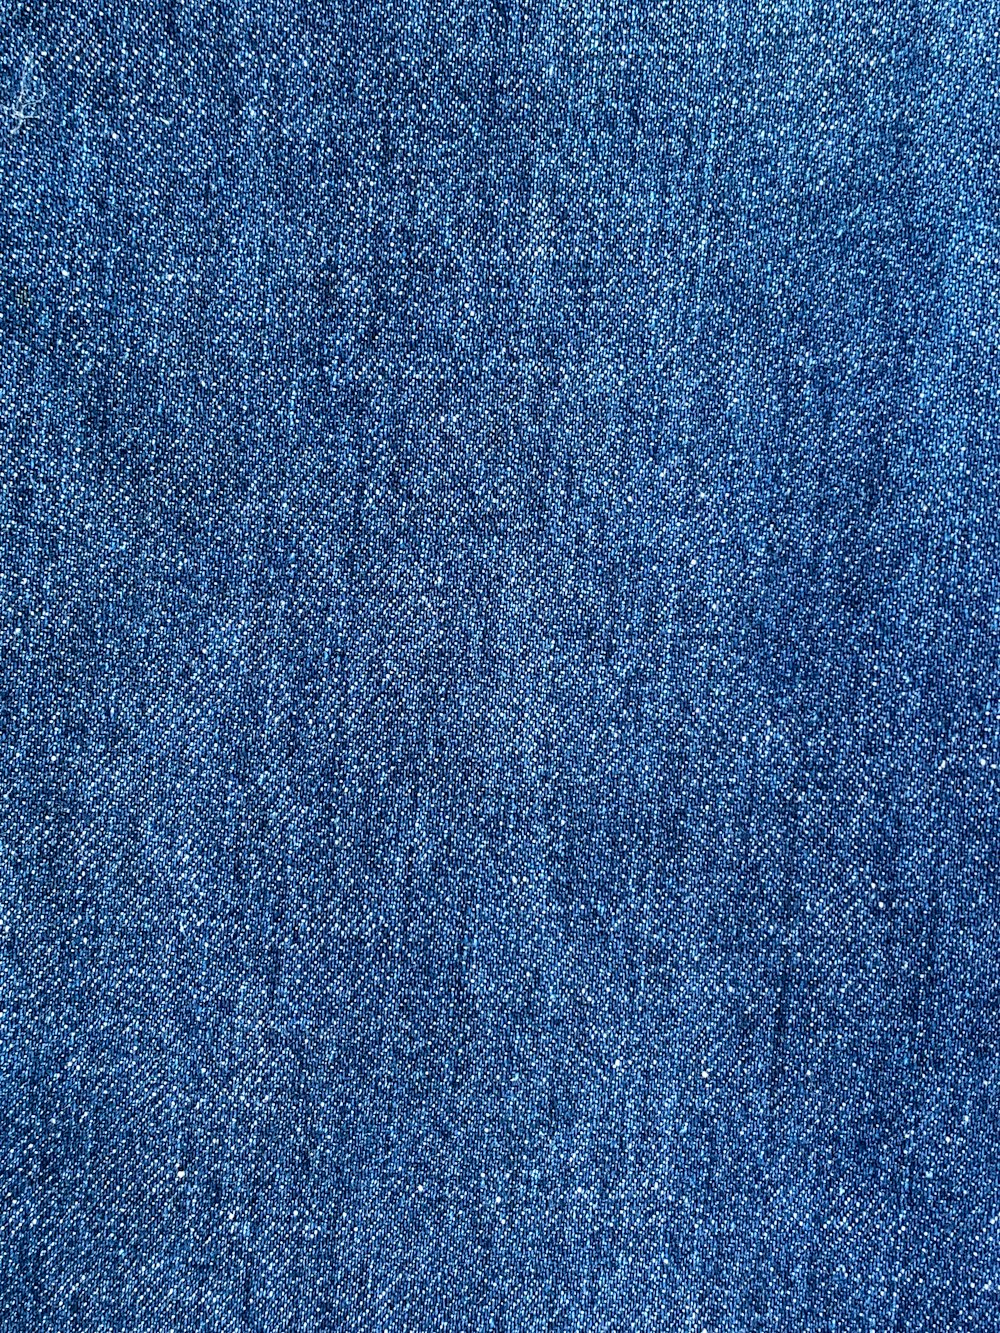 a close up of a blue jean fabric